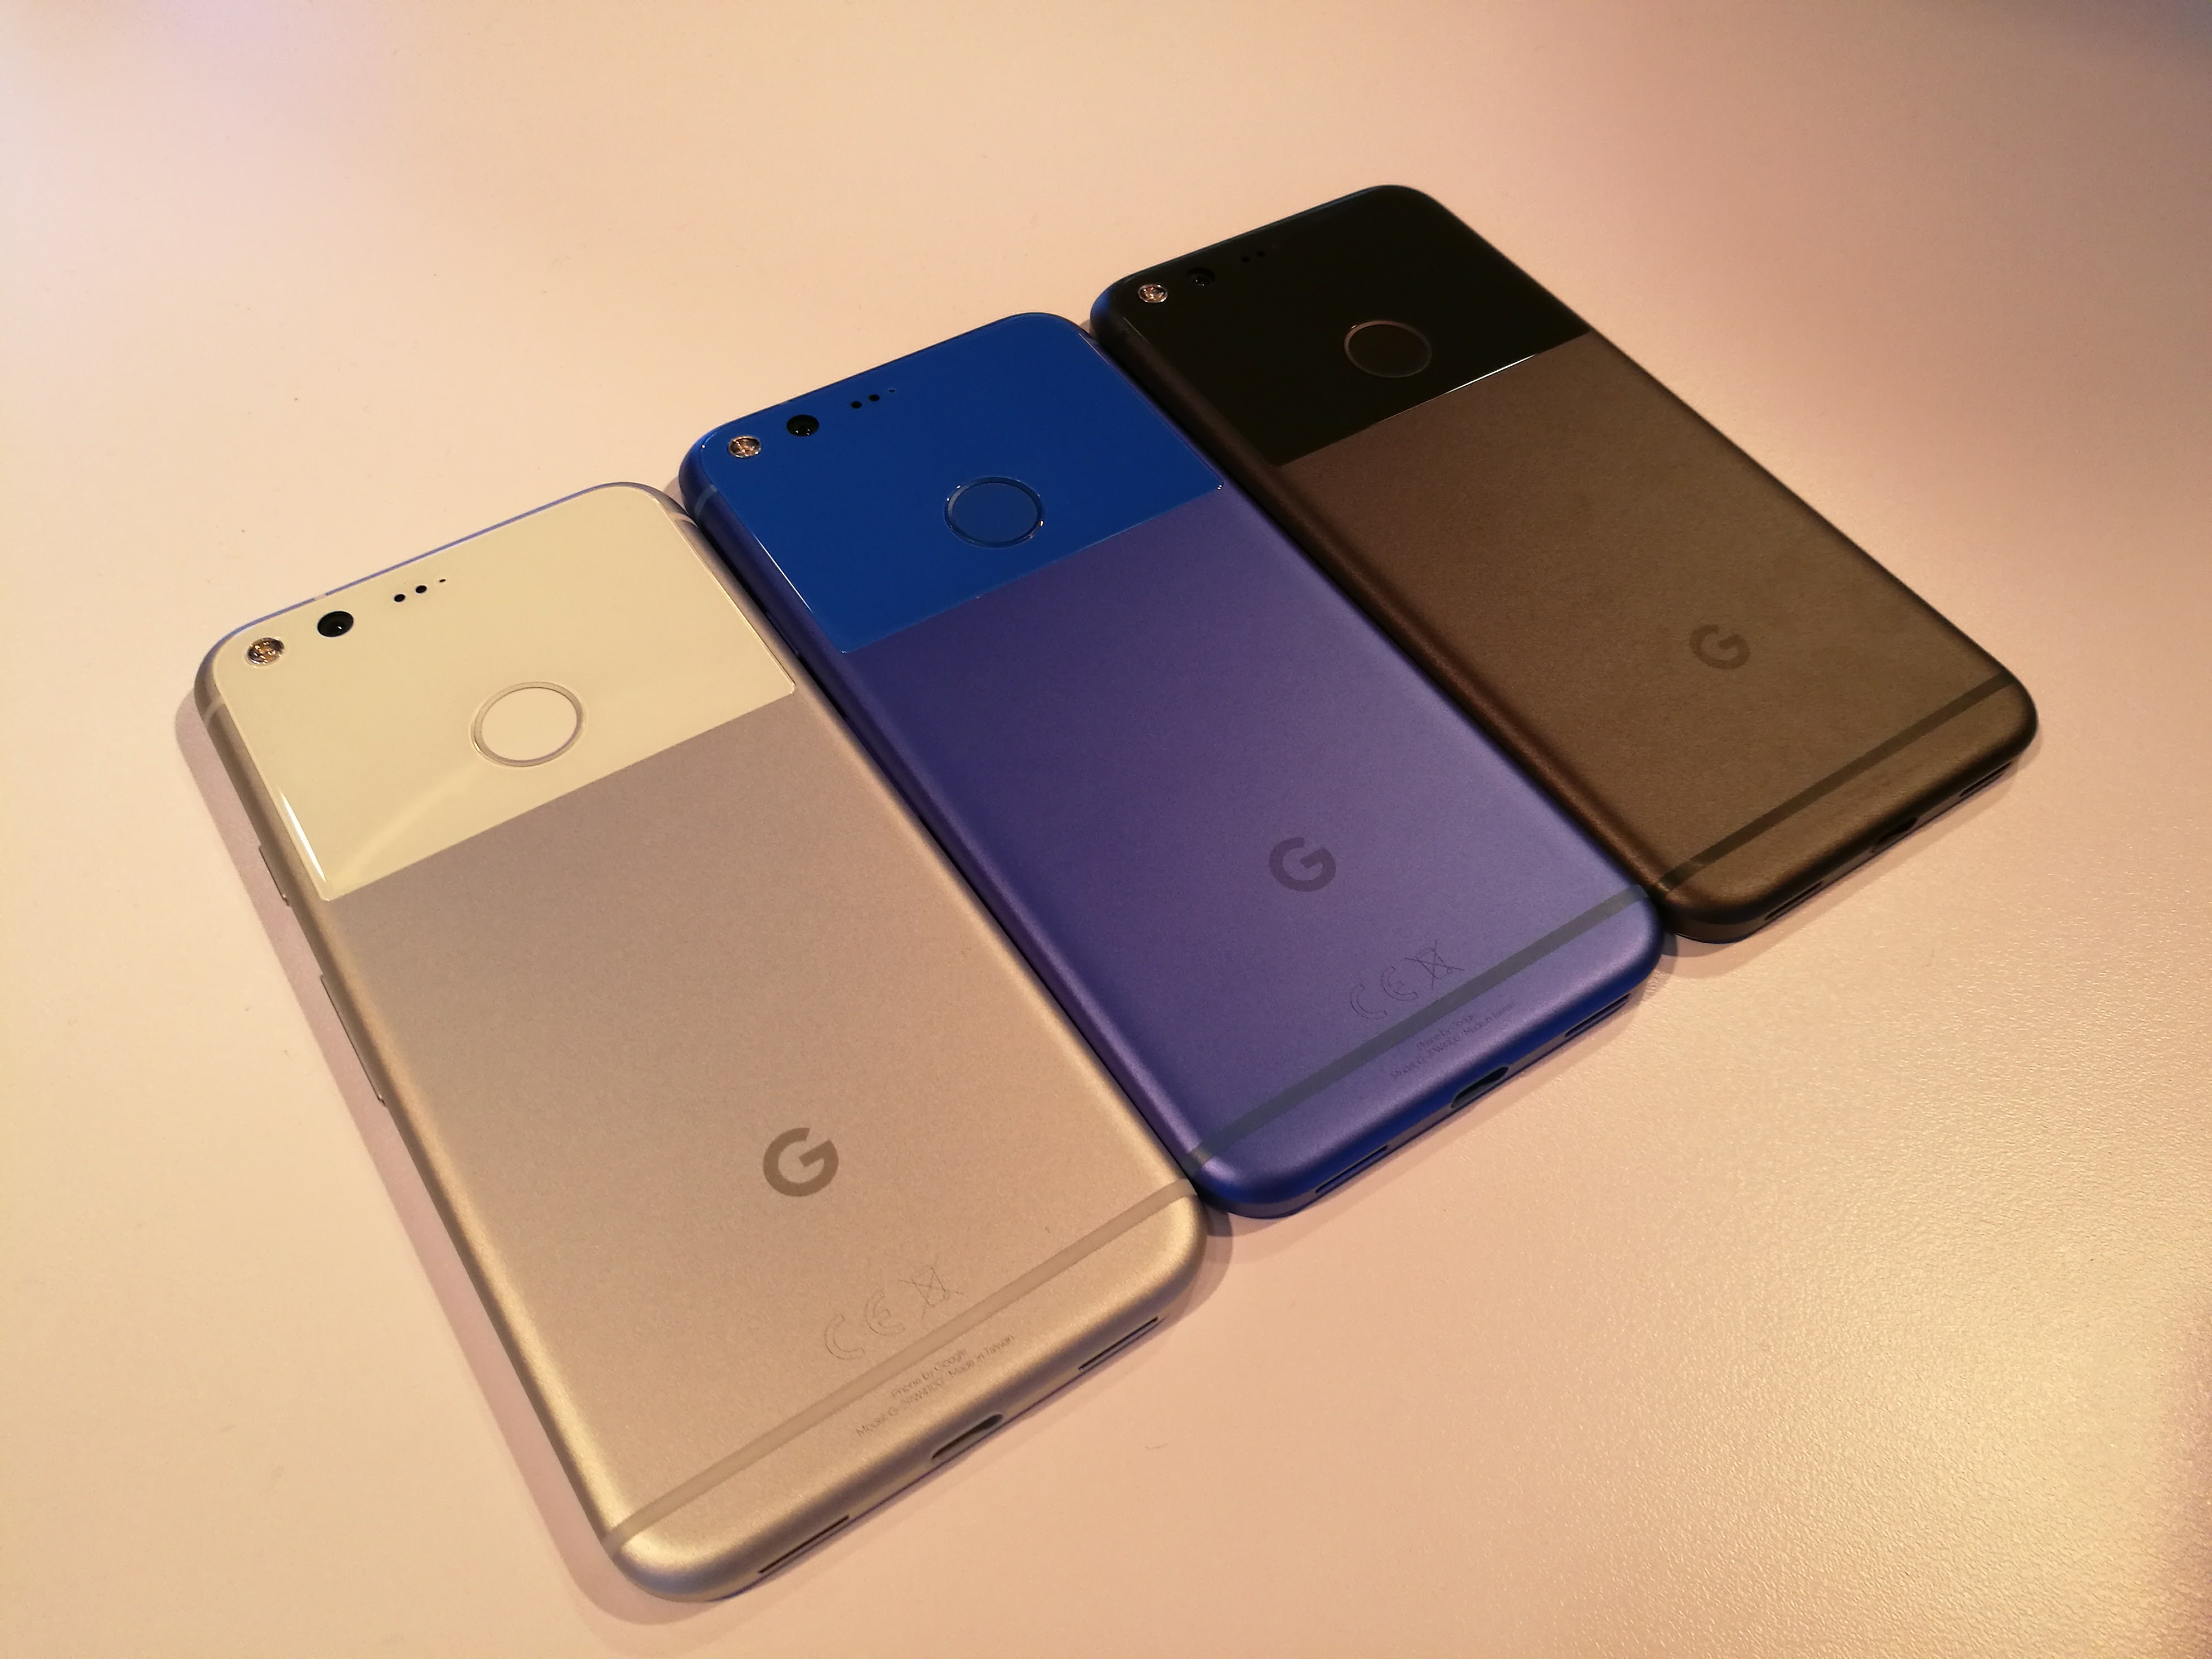 Google Pixel in Very Silver, Quite Black, and Really Blue.